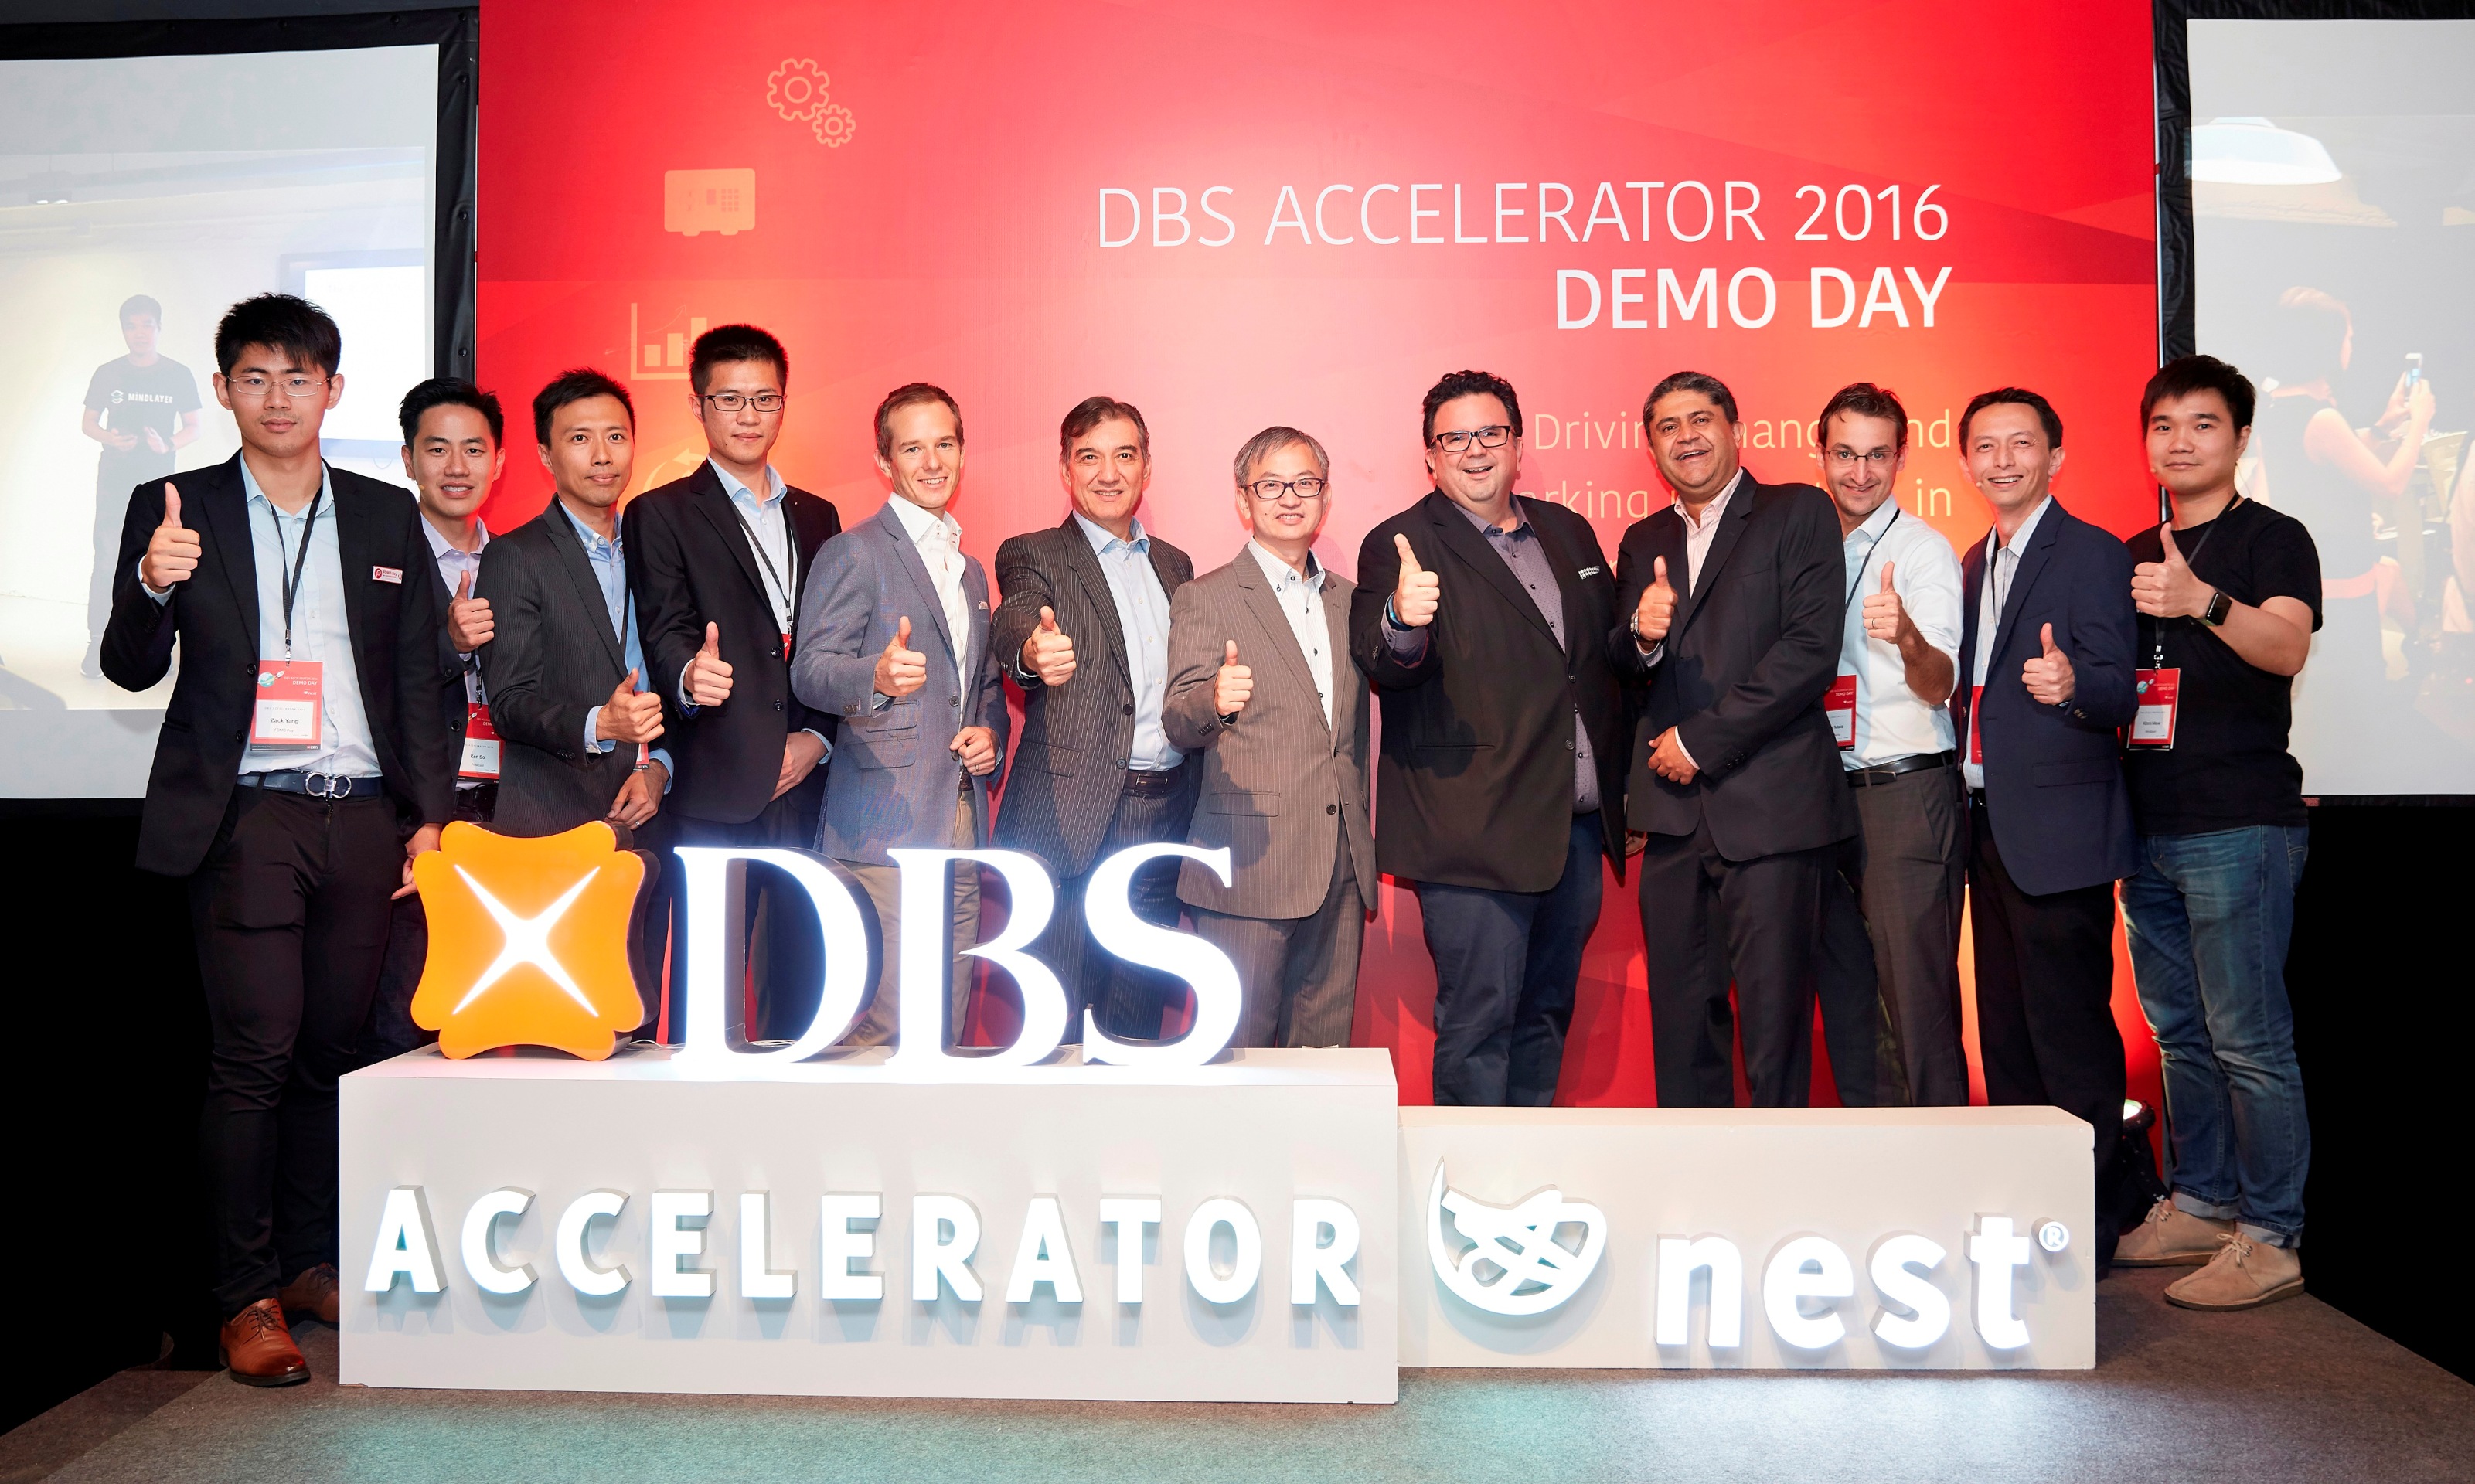 DBS Accelerator Demo Day